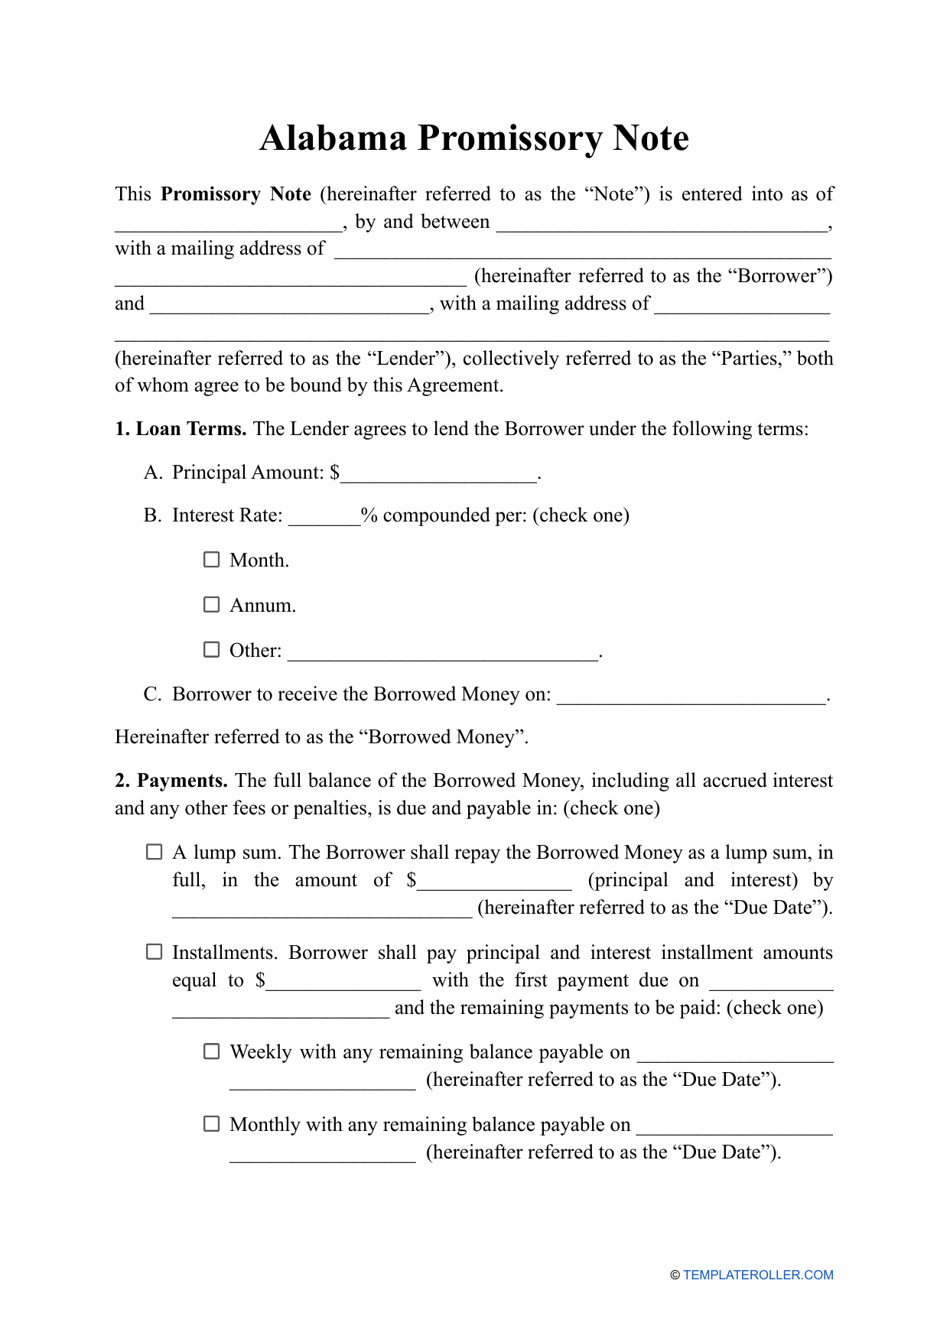 Alabama Promissory Note Template Fill Out Sign Online and Download